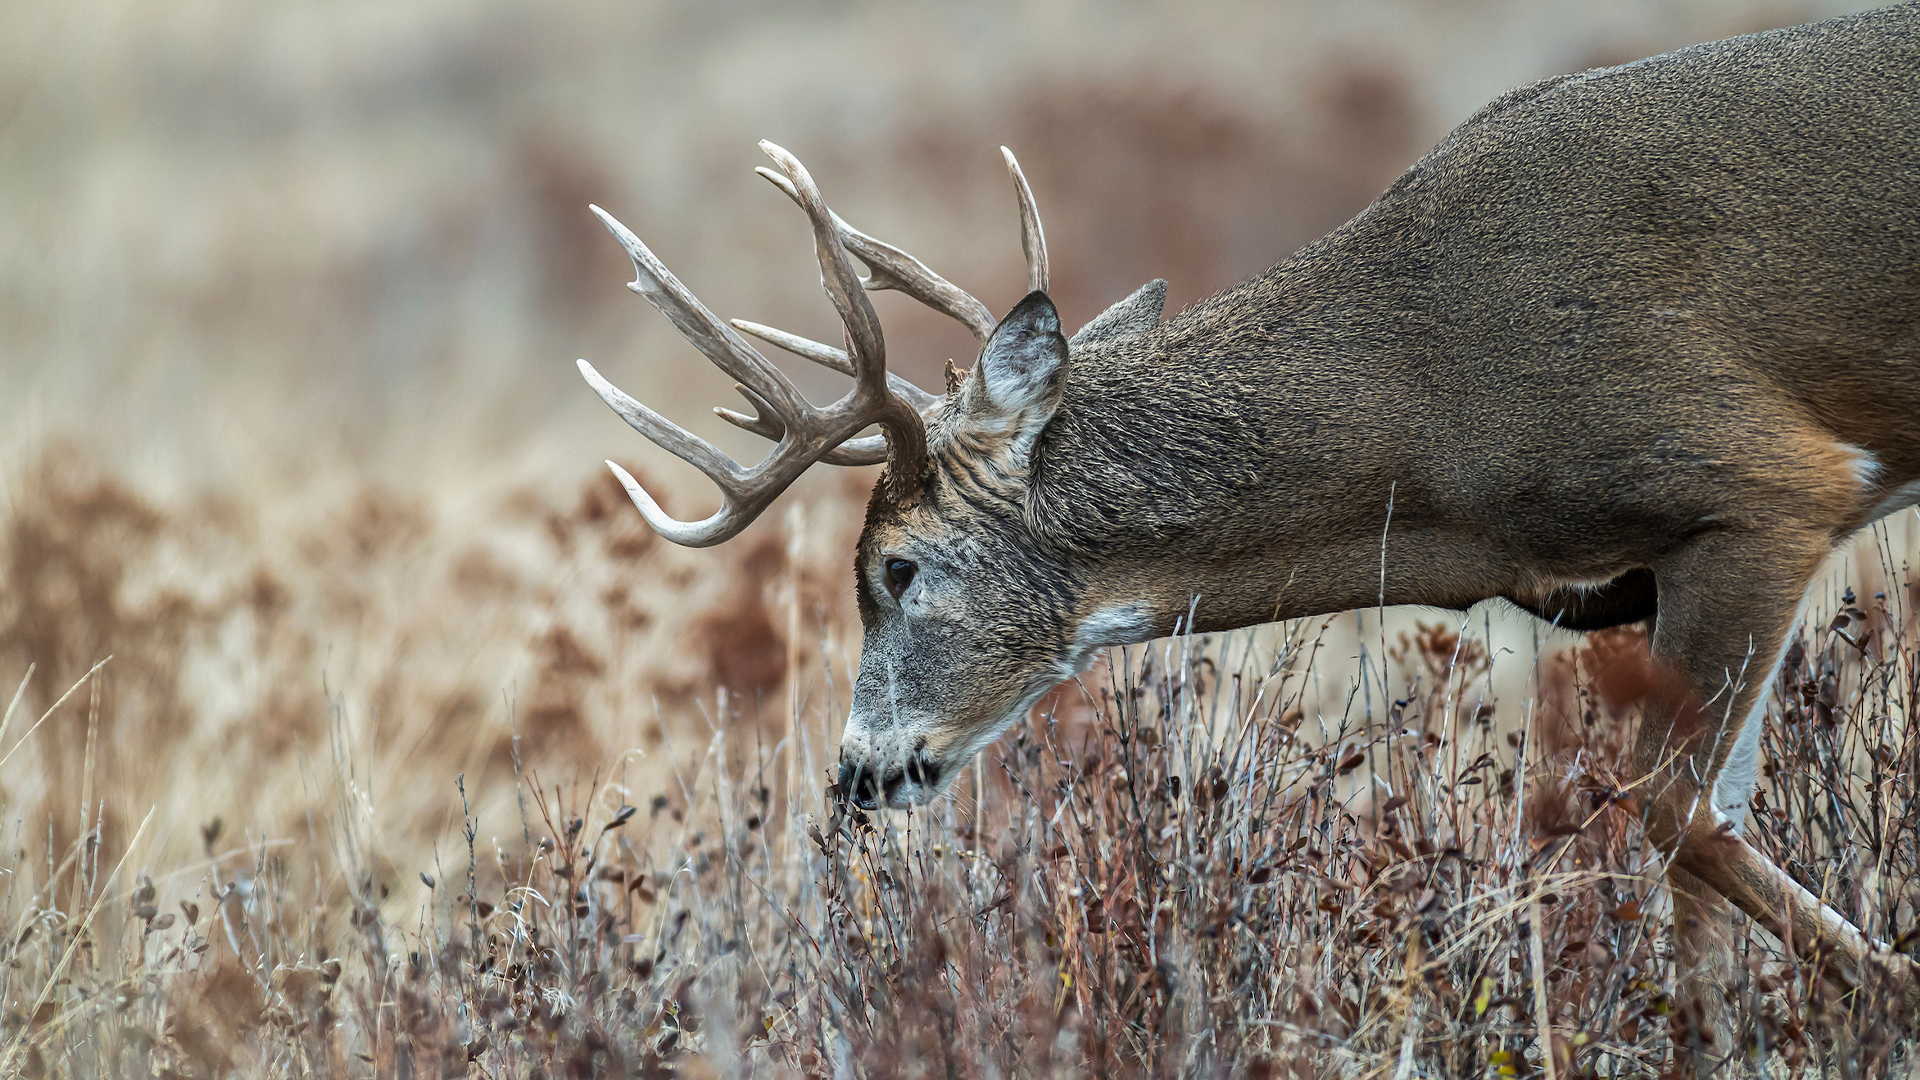 Late Season Food Sources You Should Be Hunting